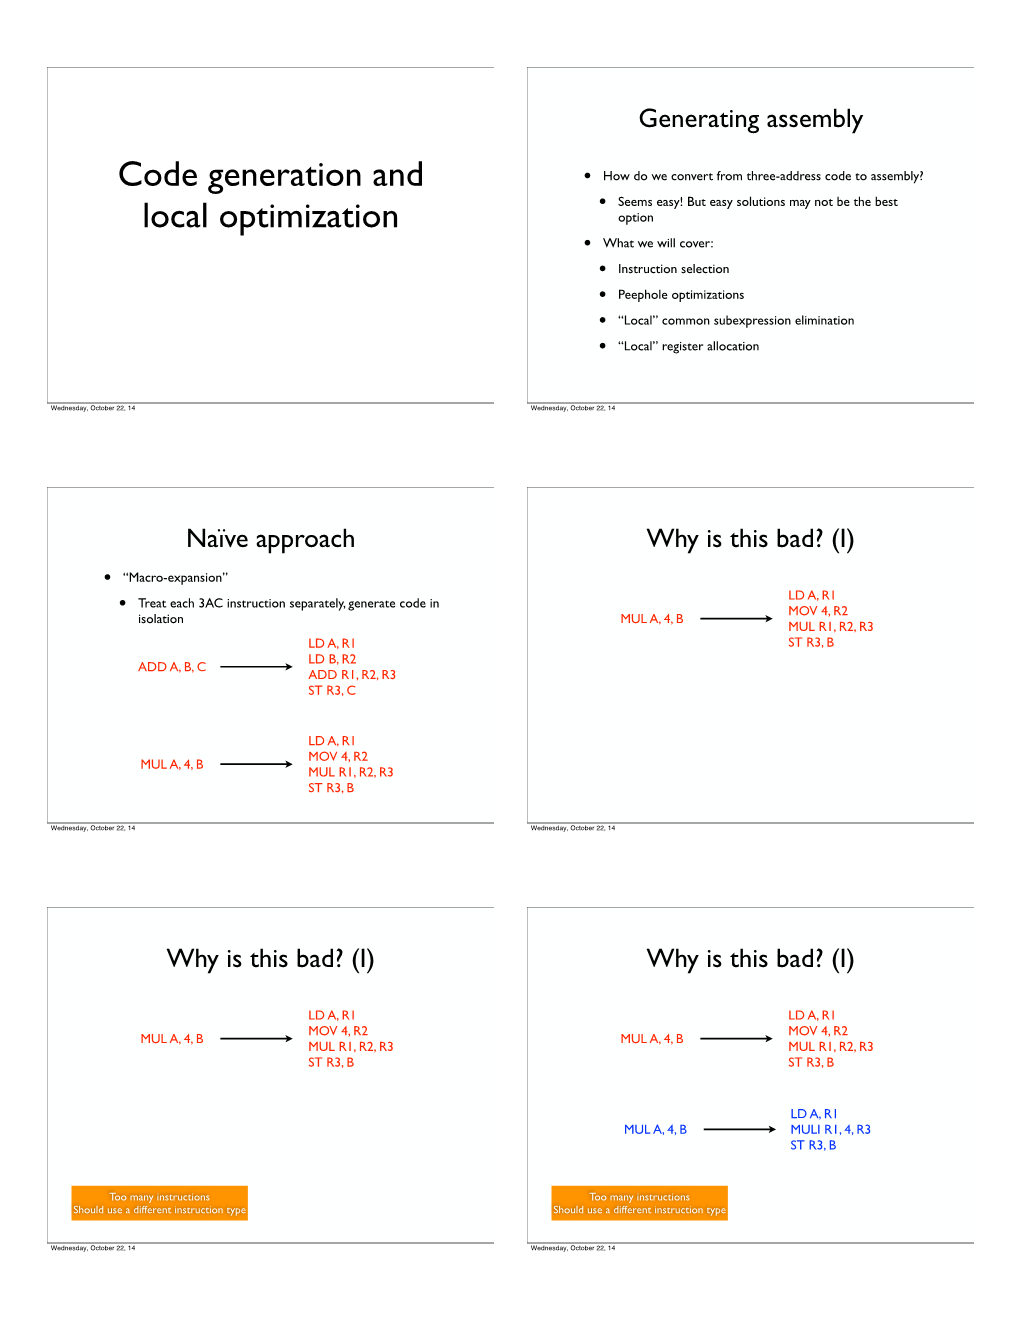 Code Generation and Local Optimization